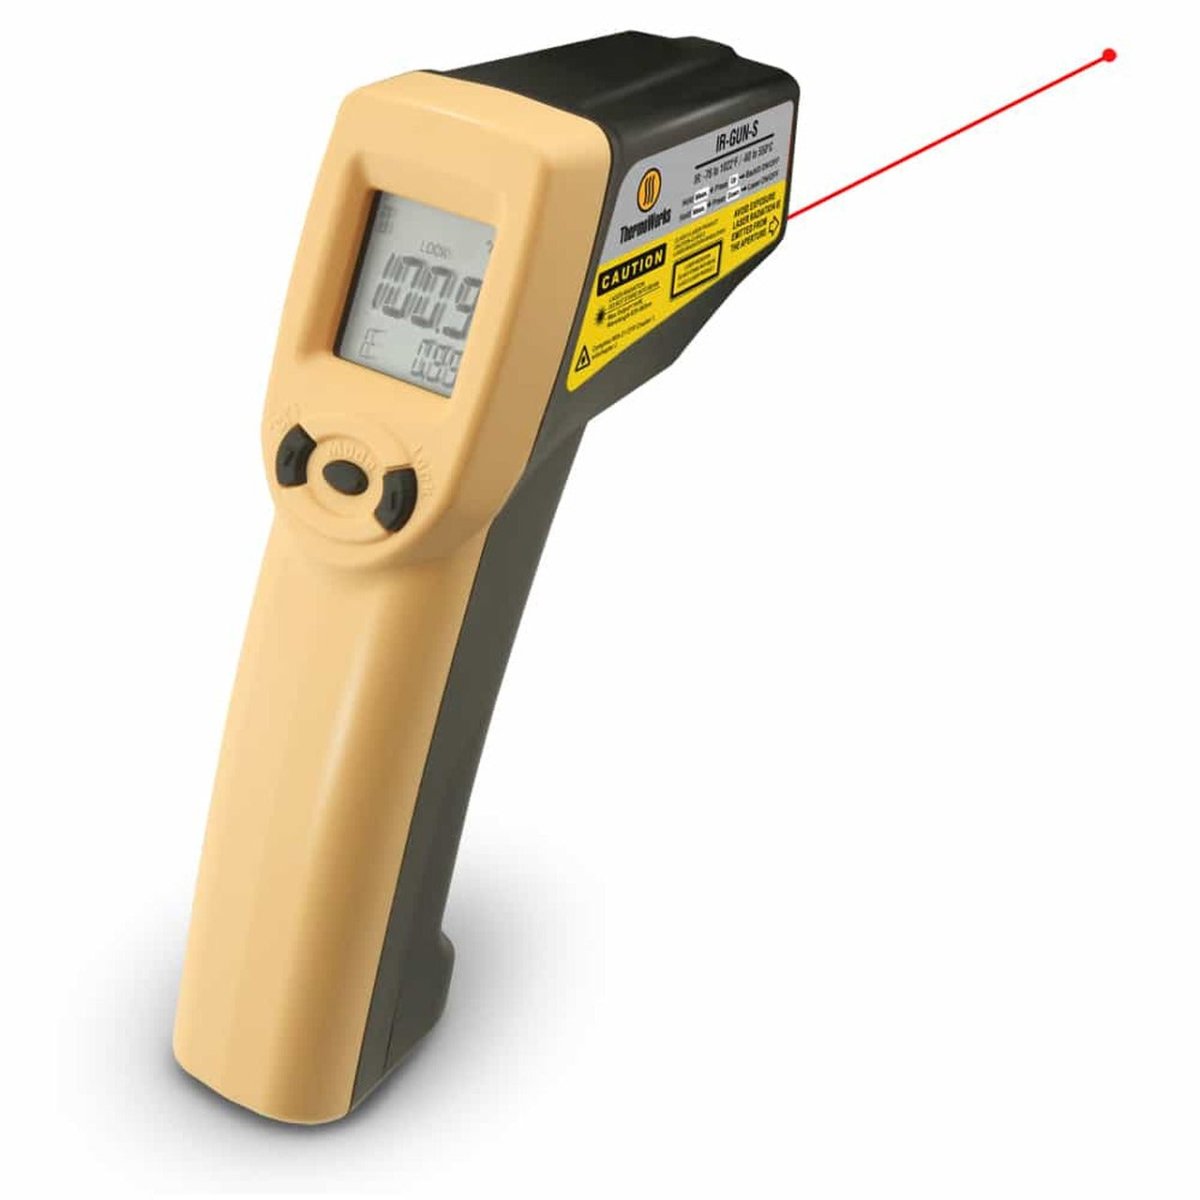 High temperature thermometer, Pyrometer [THS-192] - $48.98 : Auber  Instruments, Inc., Temperature control solutions for home and industry